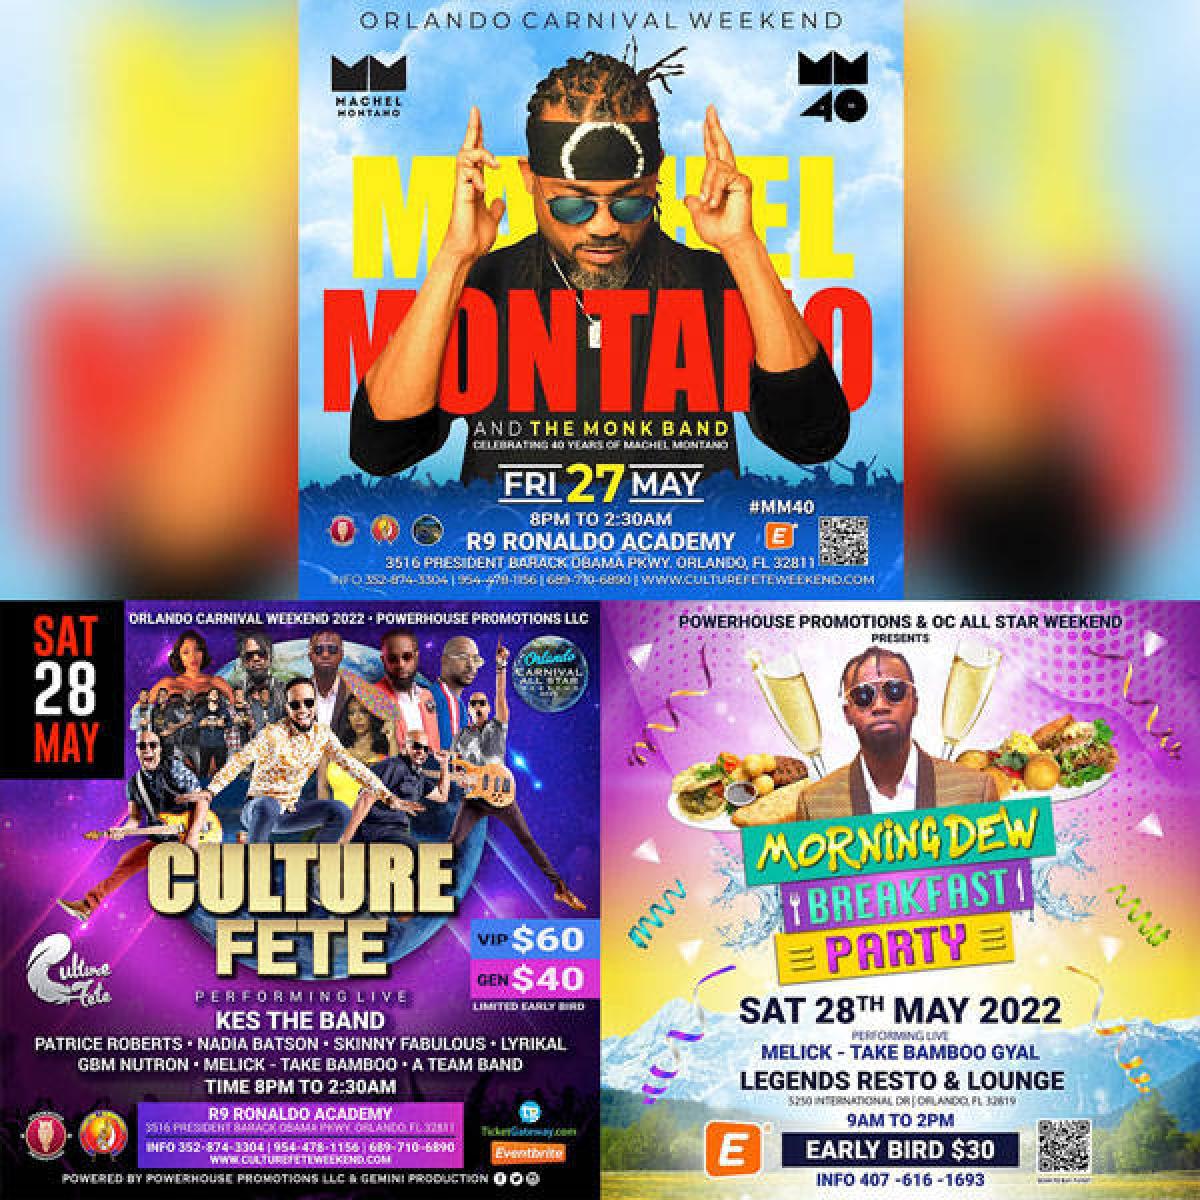 Culture Fete Weekend: All Access Pass flyer or graphic.